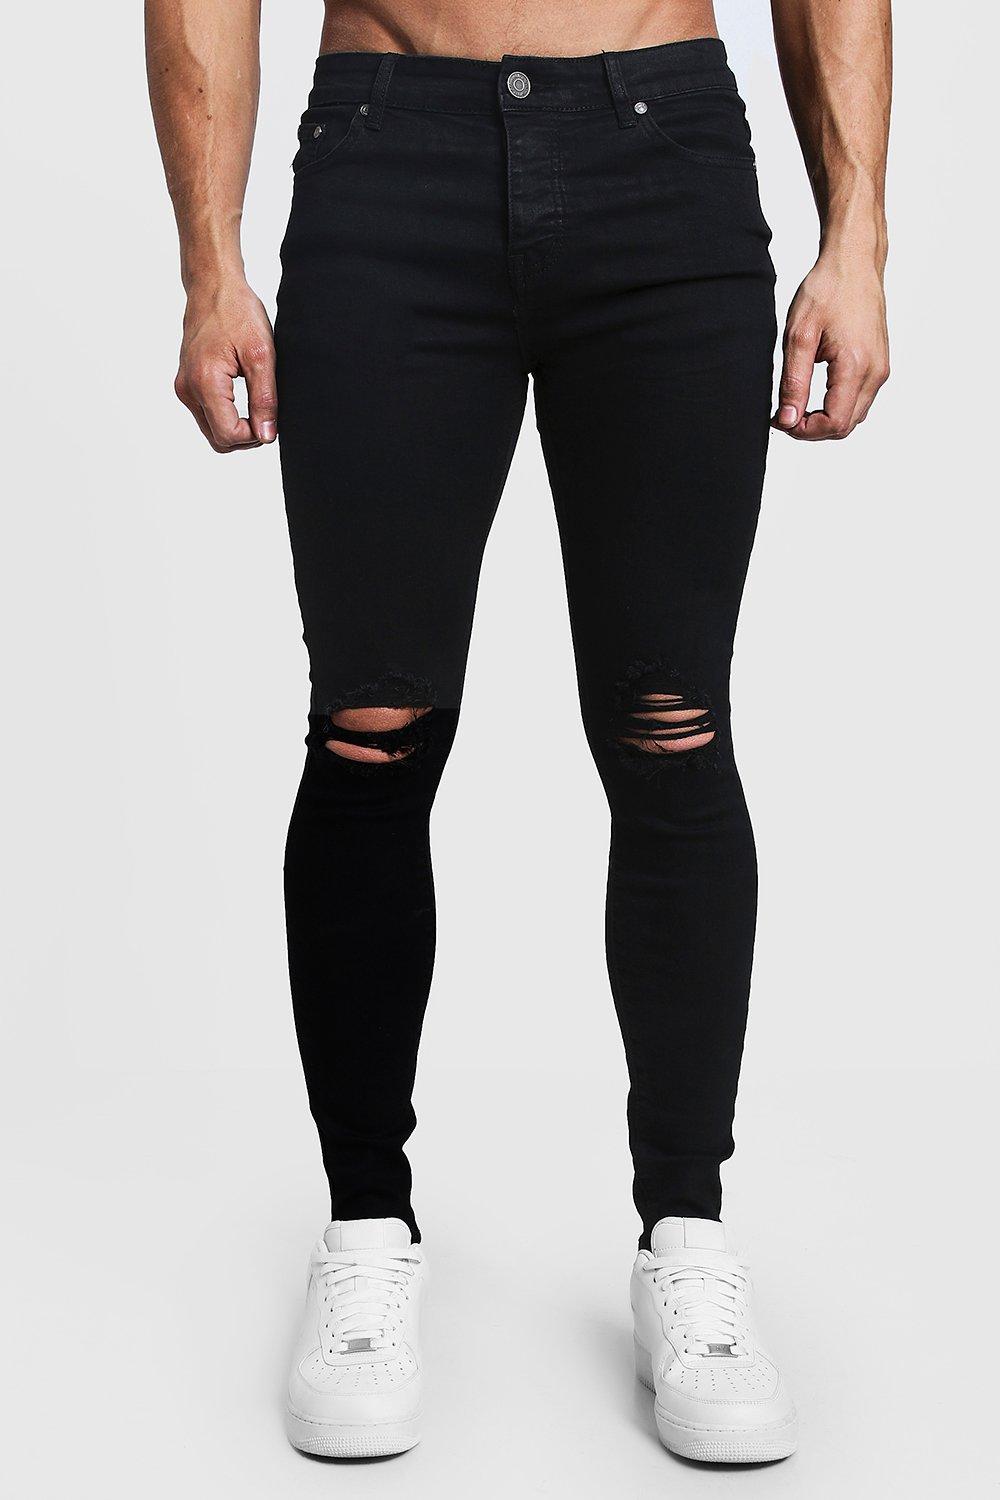 black ripped spray on jeans